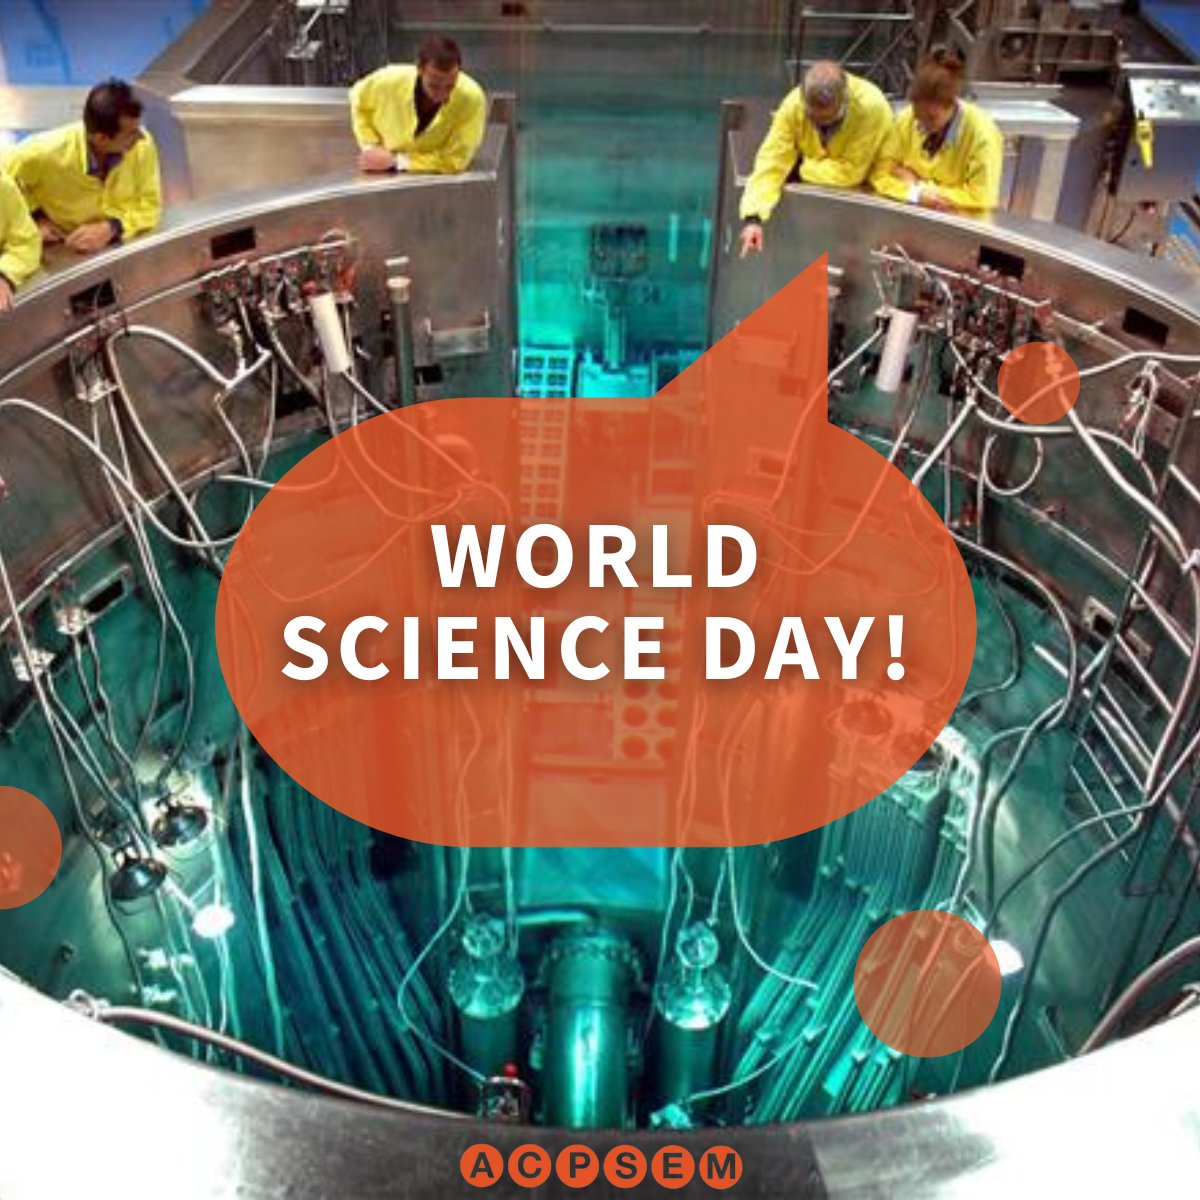 🌍 Happy #WorldScienceDay! Today, we applaud the scientists who study, heal, nurture, and innovate to better our communities and our planet. This day reminds us of the myriad ways science enriches our daily lives. #ScienceForPeace #InnovationForSustainability